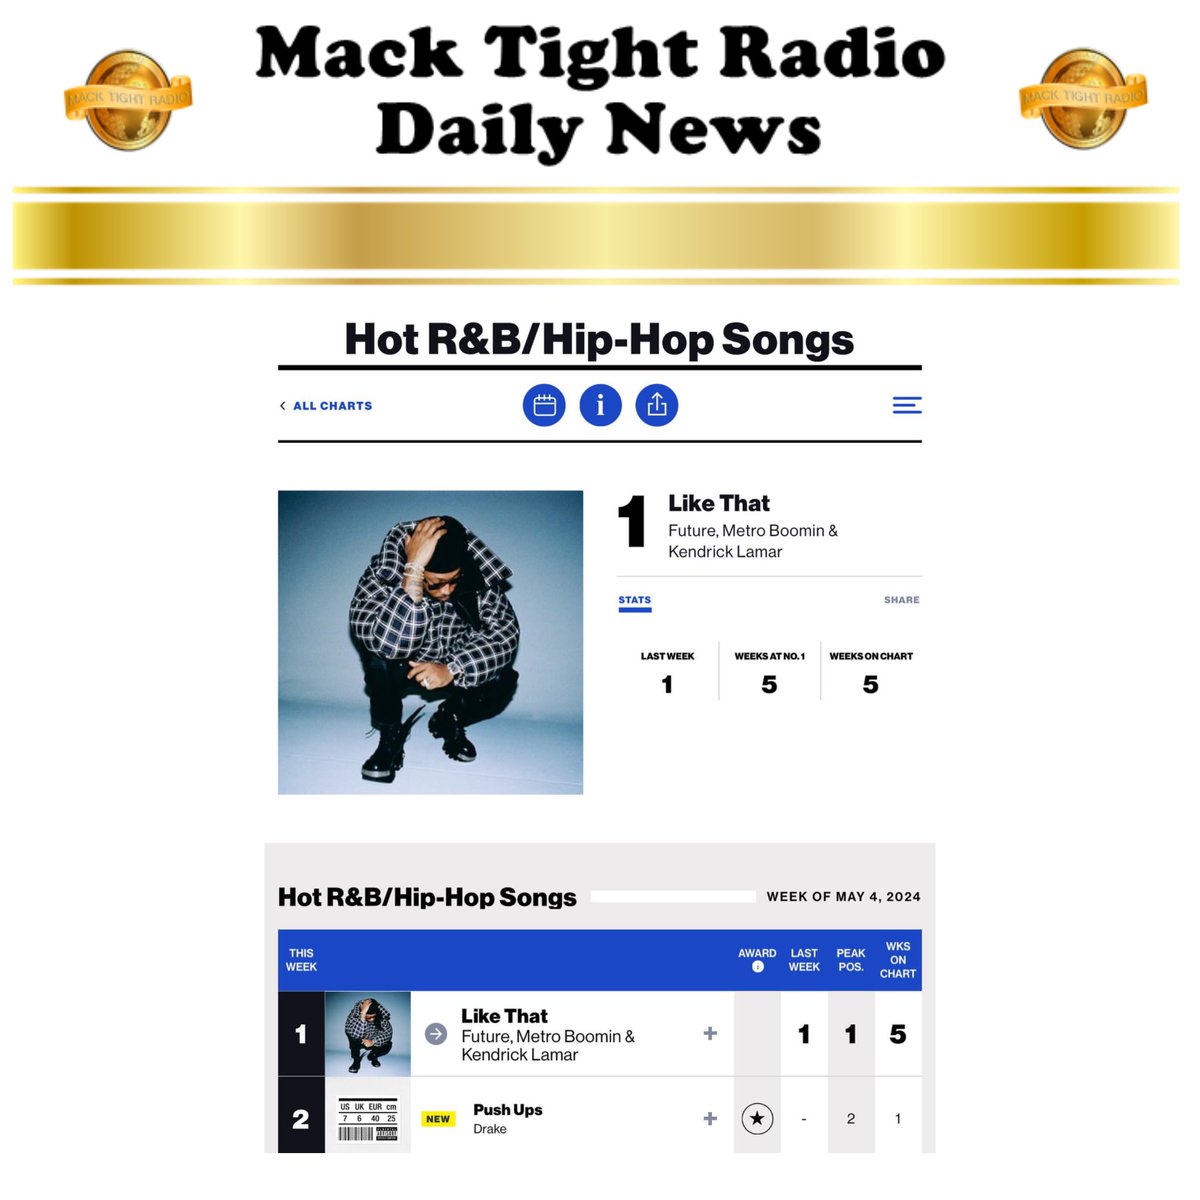 #Billboard reports that #Drake’s #PushUps debuted at #2 on the #RandB ❌ #HipHop chart ❌ is the top streamed song in the genre for the week 👀 - #MackTightRadio 📻 #Ready2LearnShow 🧐 [Watch #MackTightTV On #RokuTV ❌ #FireTV On Channel #MackTight ❌ LISTEN TO Mack Tight Radio